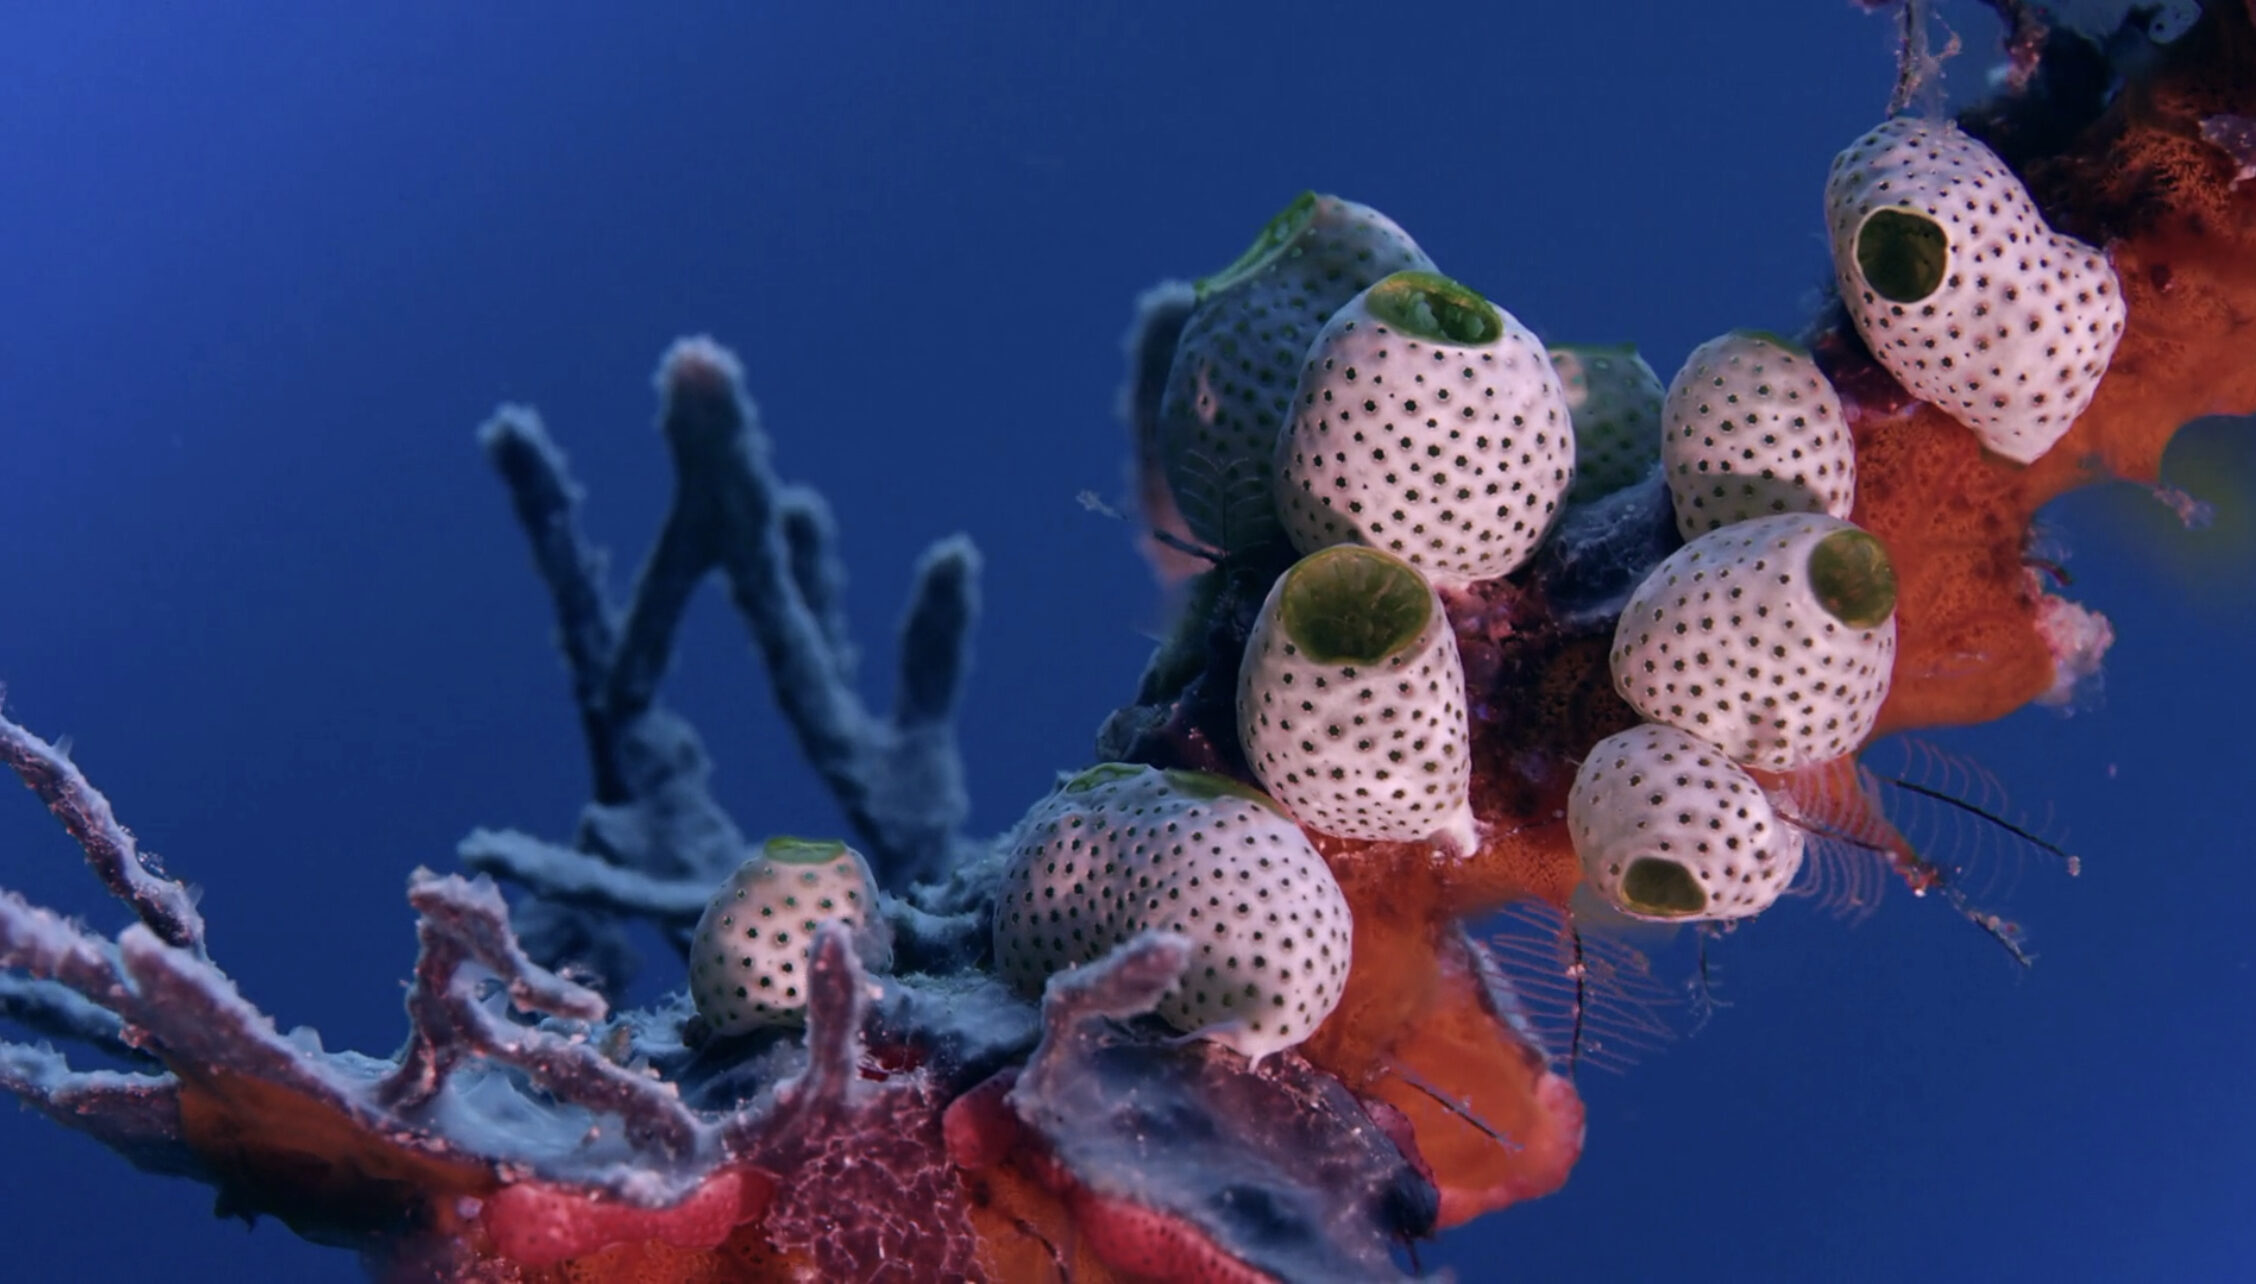 Image of a colony of green sea squirts also known as Atriolum robustum